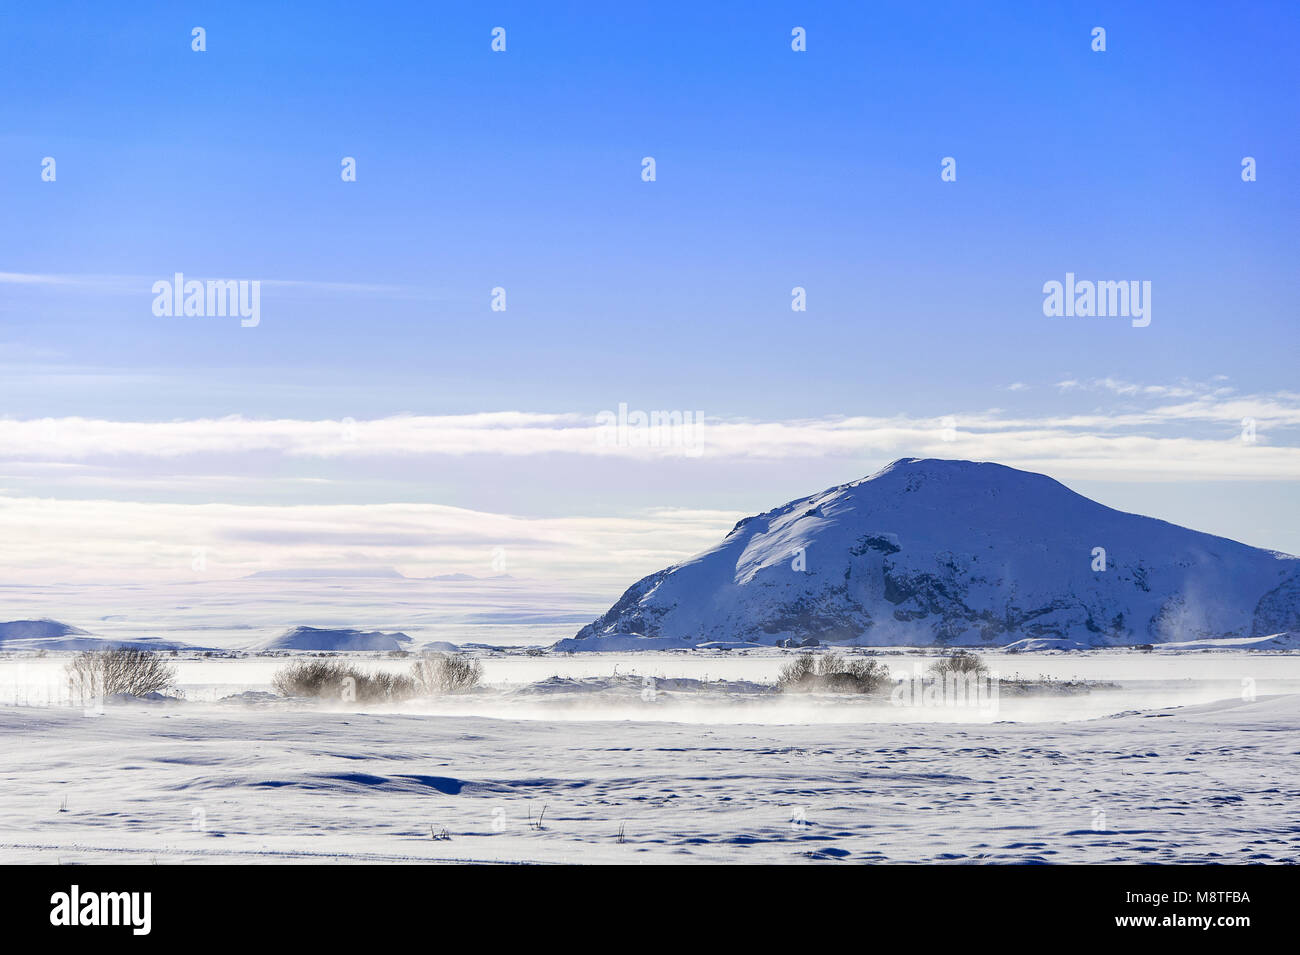 Myvatn geothermal lake and Mount Vindbelgjarfjall, northern Iceland. Snowy winter scene, steaming lake with mountain background Stock Photo